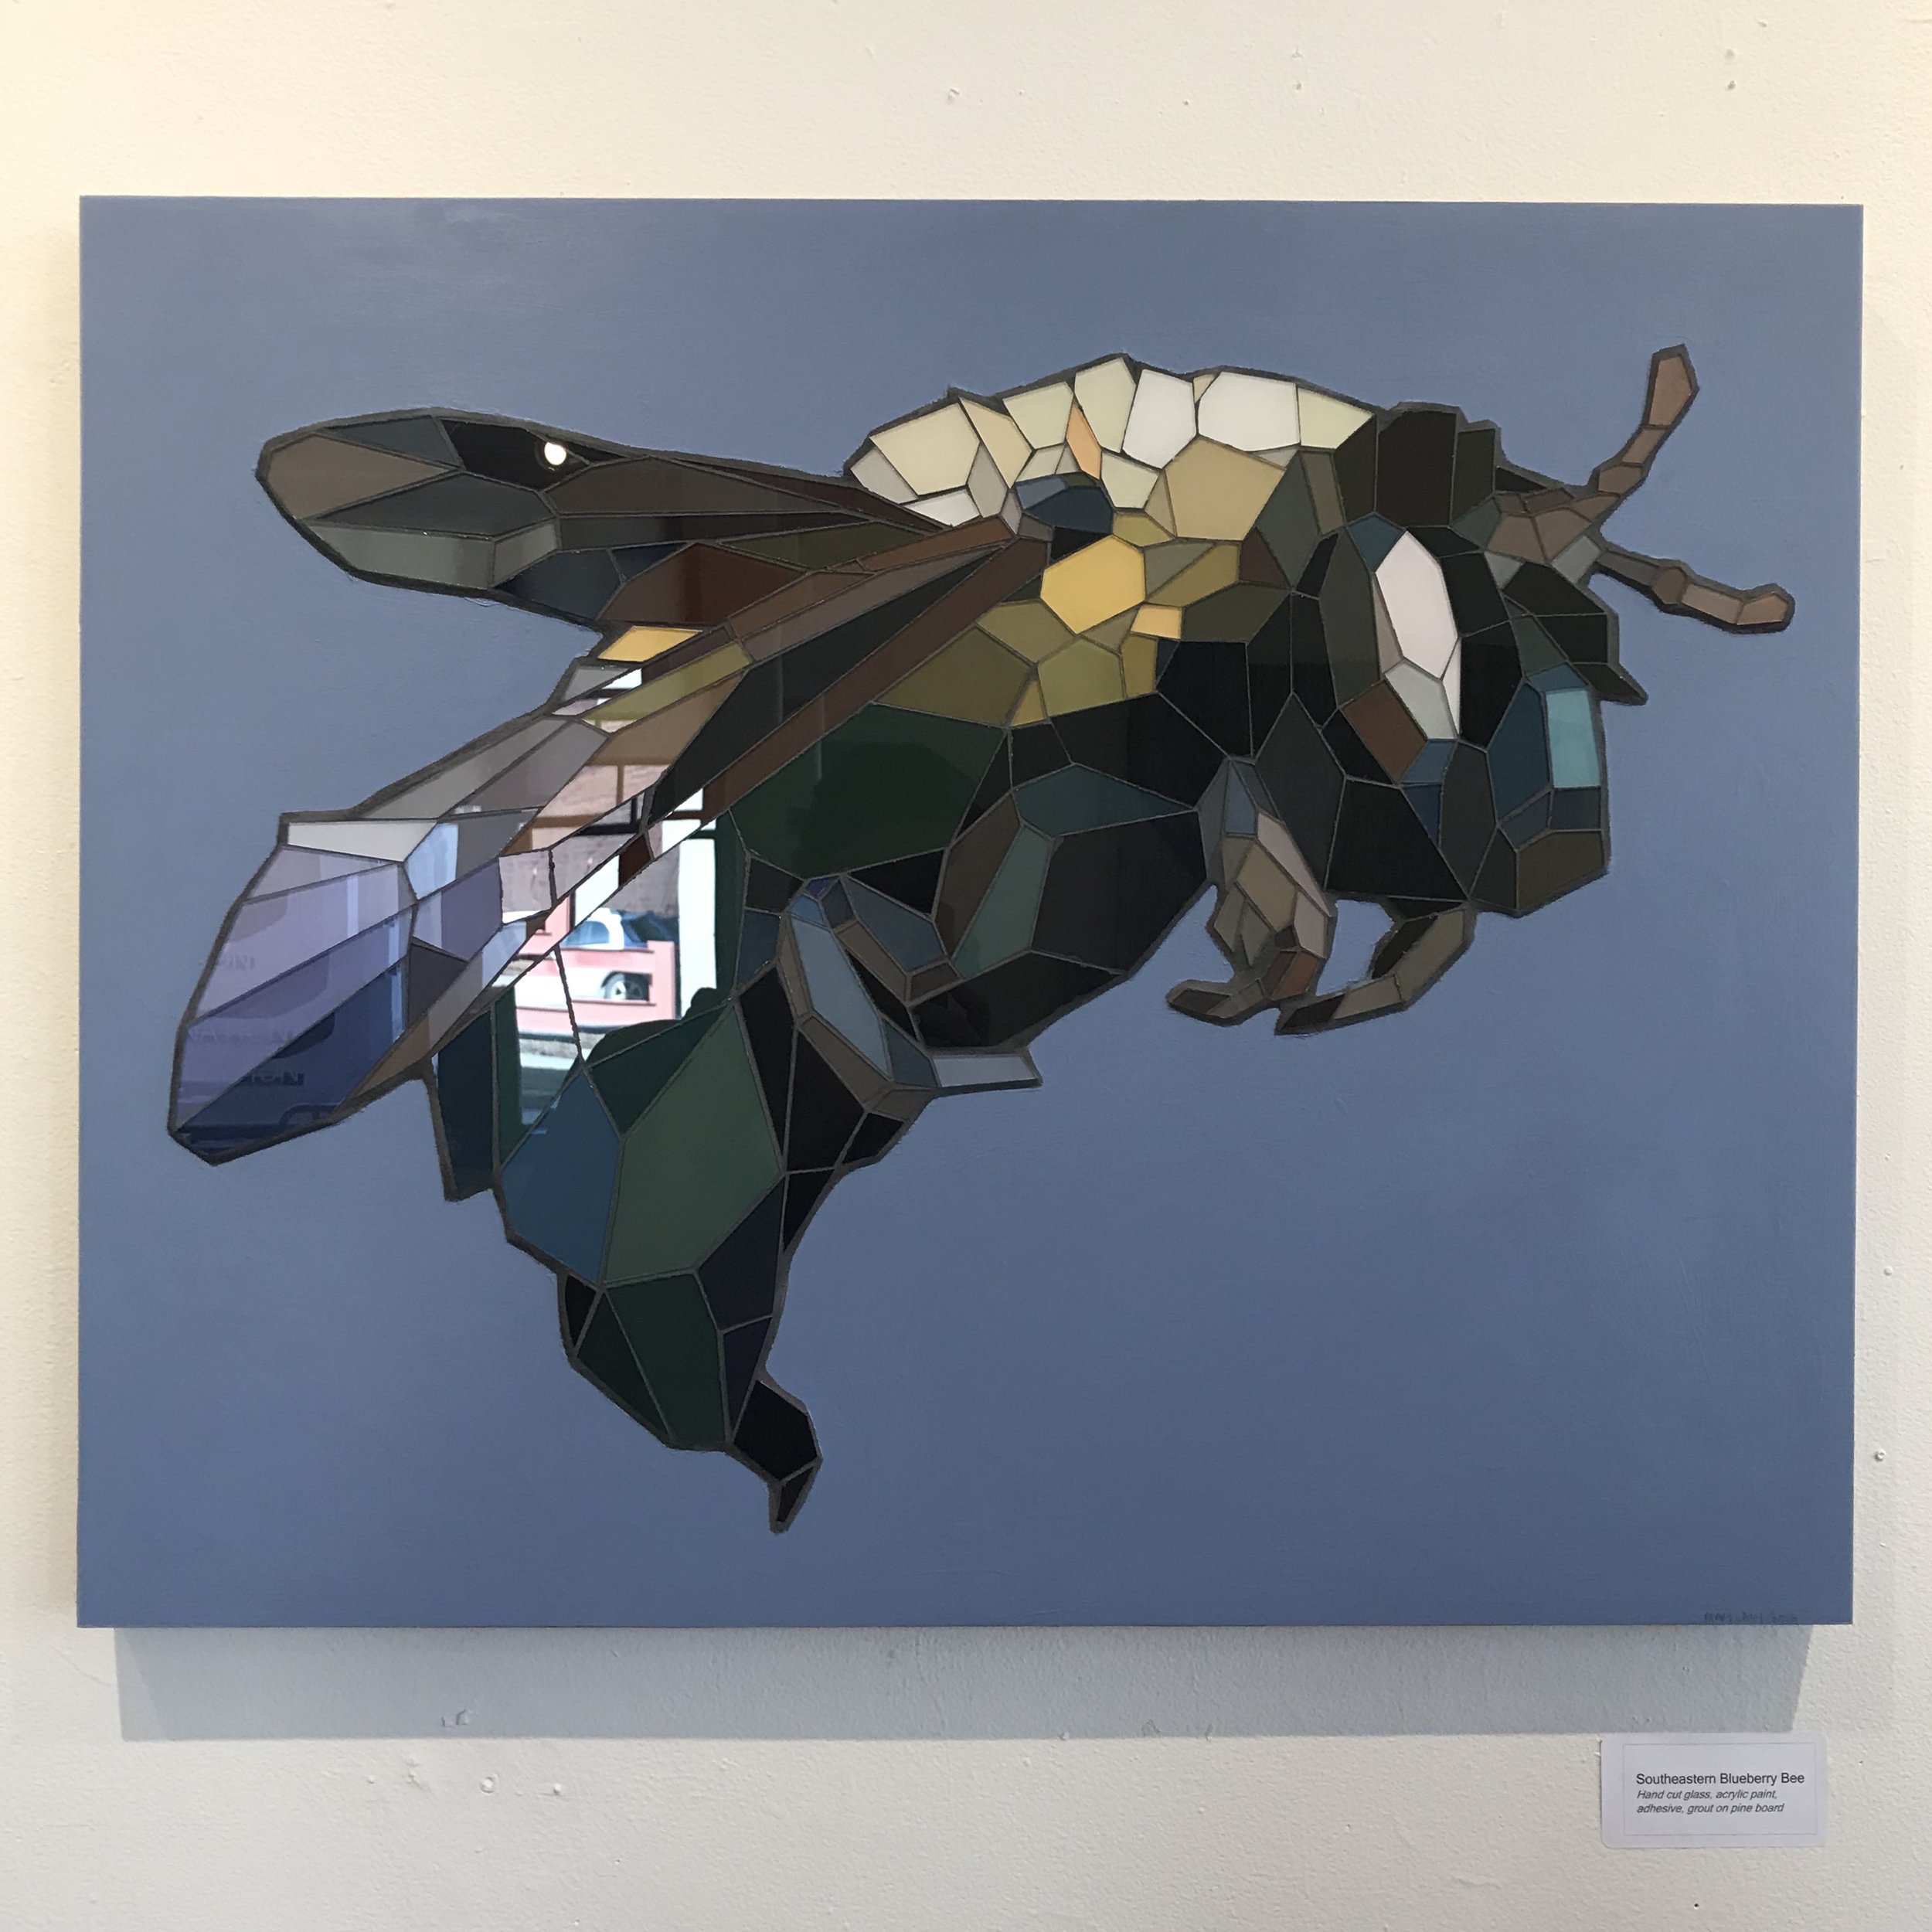 Southeaster Blueberry Bee - 24"x30" - SOLD